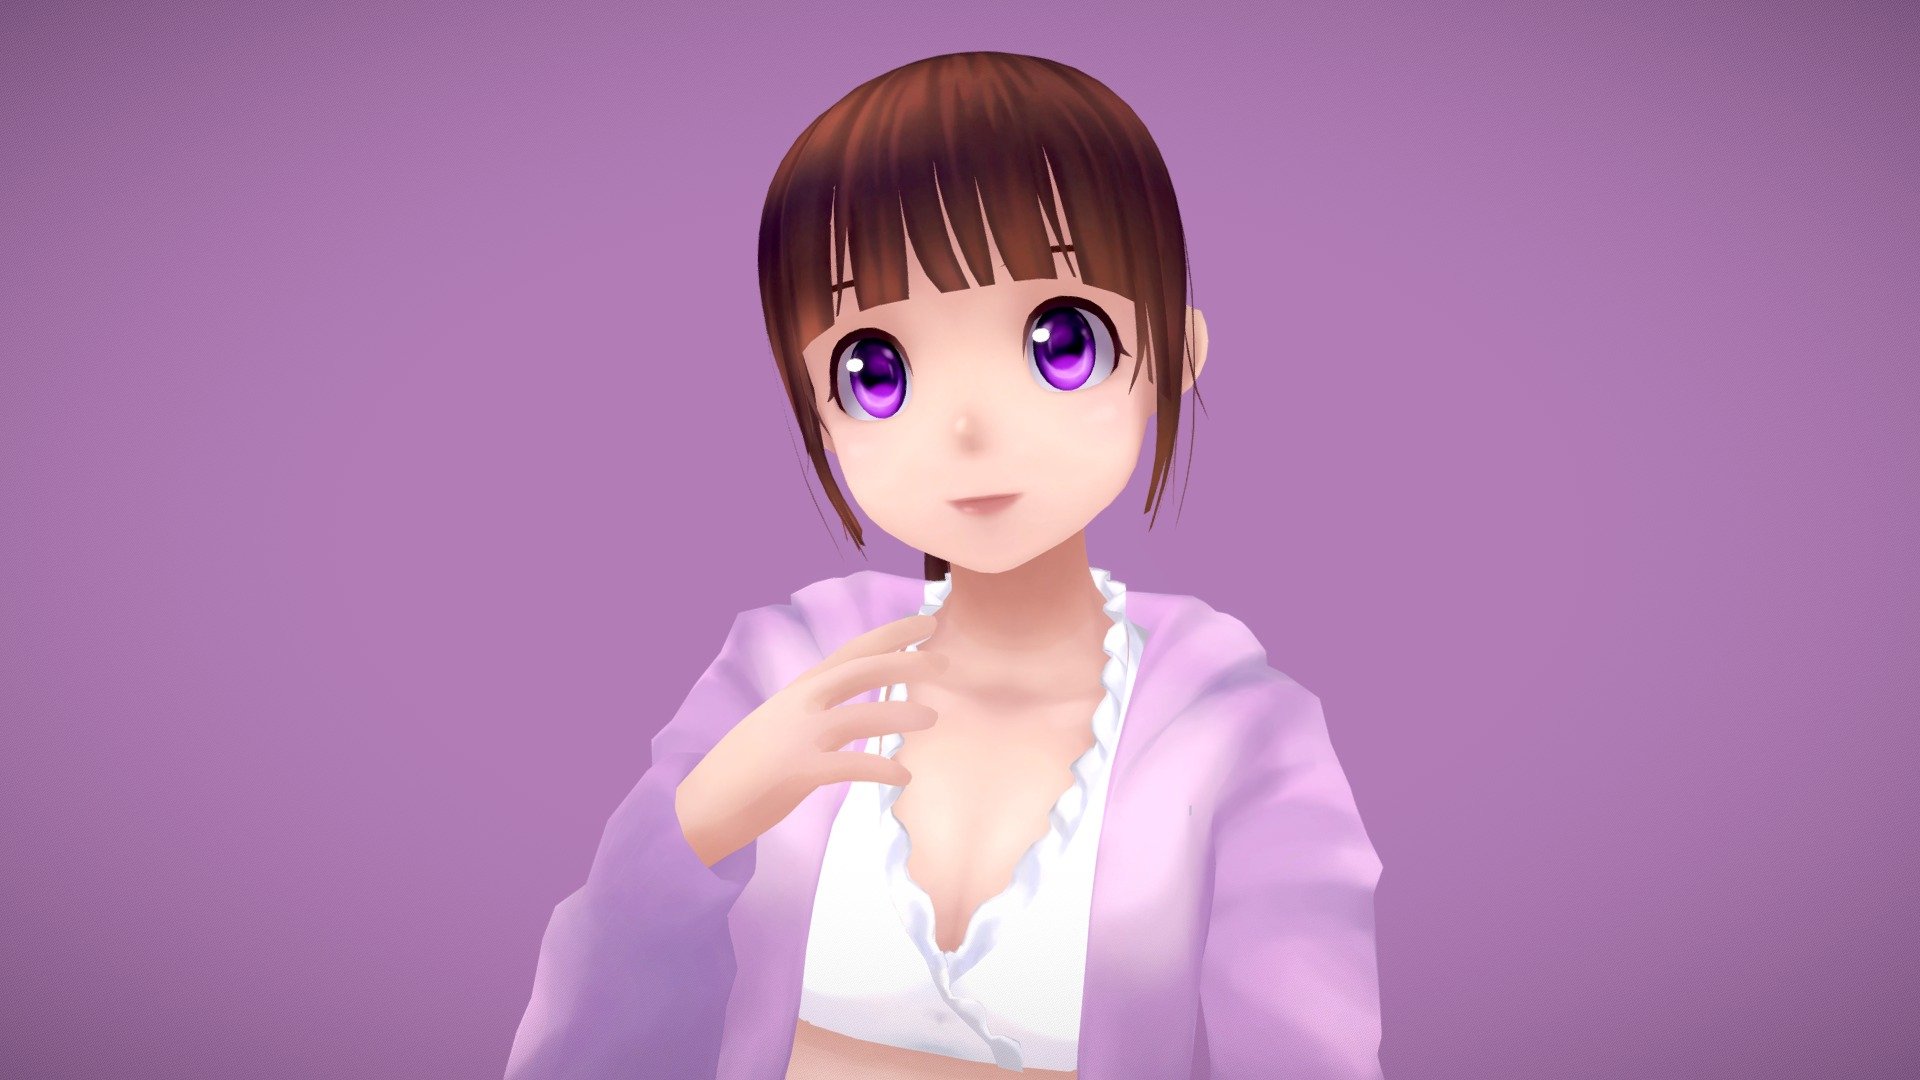 Eru Chitanda is the main character of Classic Literature Club series and Hyouka. She is a student at Kamiyama High School and the president of the Classical Literature Club where it is usually her who is responsible for getting the club involved with solving various mysteries.
My practice on handpainting 3d model